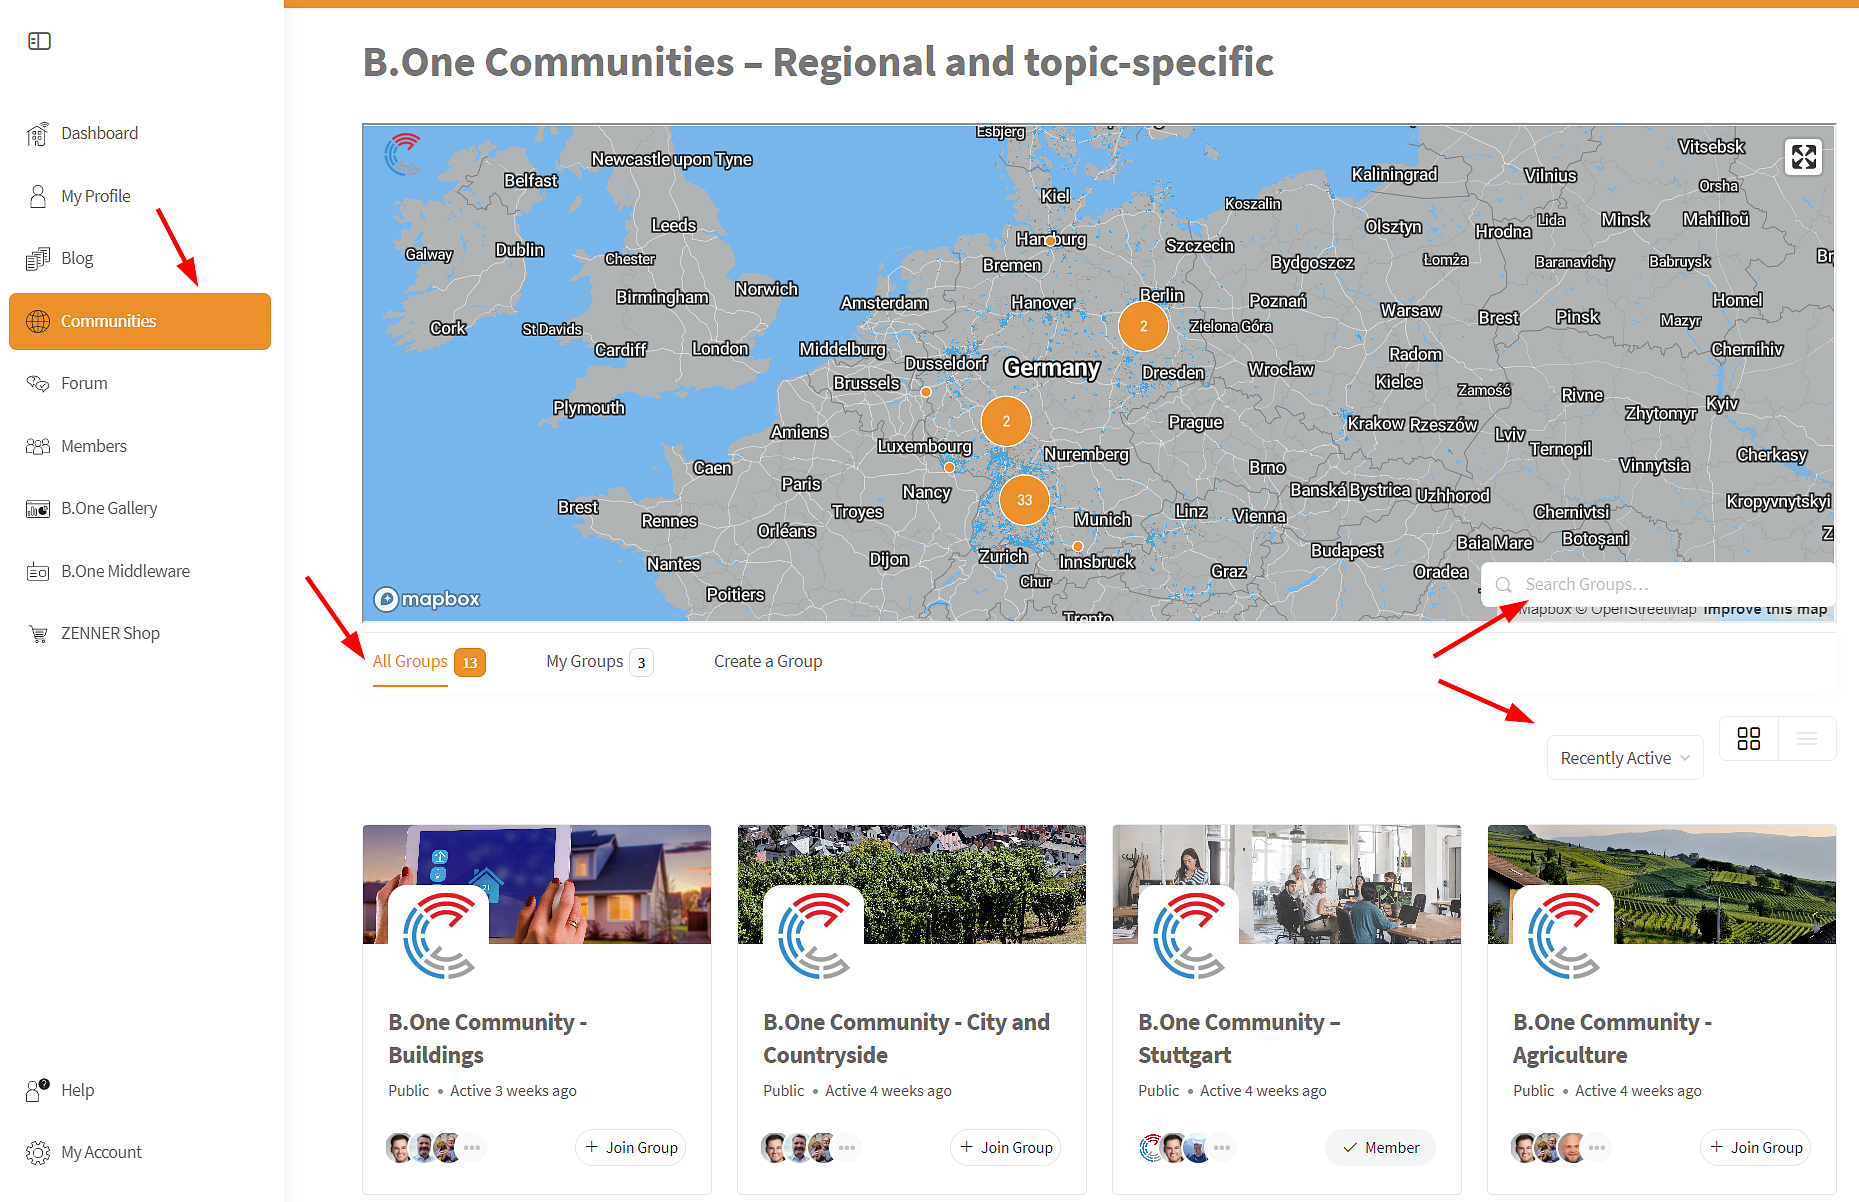 B.One Community: Regional and topic-specific Communities